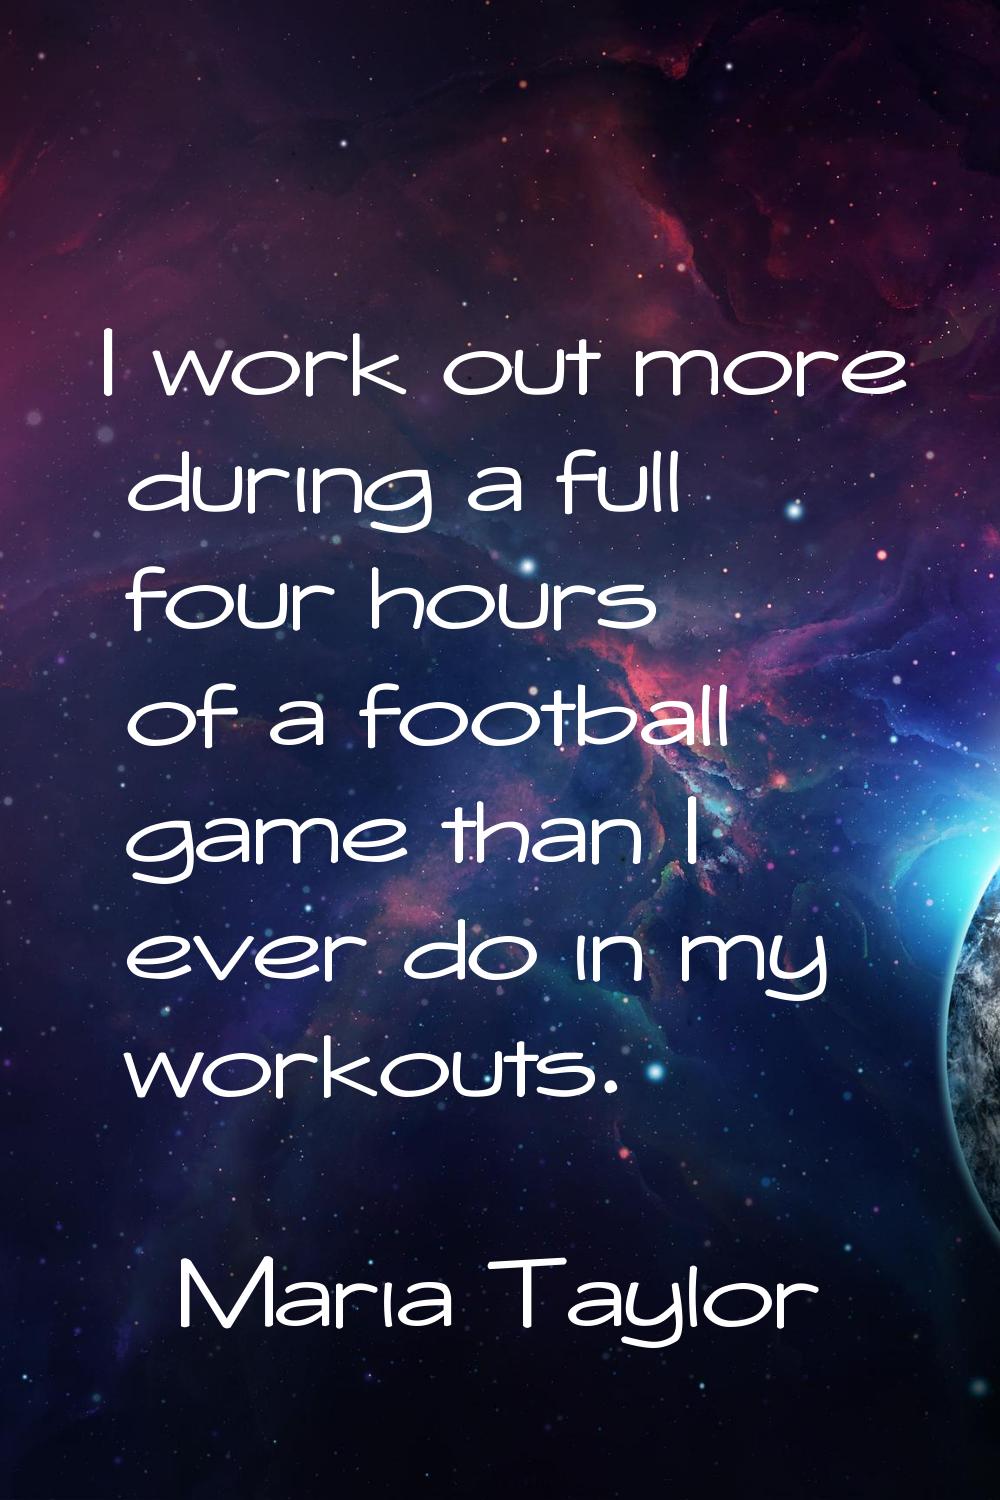 I work out more during a full four hours of a football game than I ever do in my workouts.